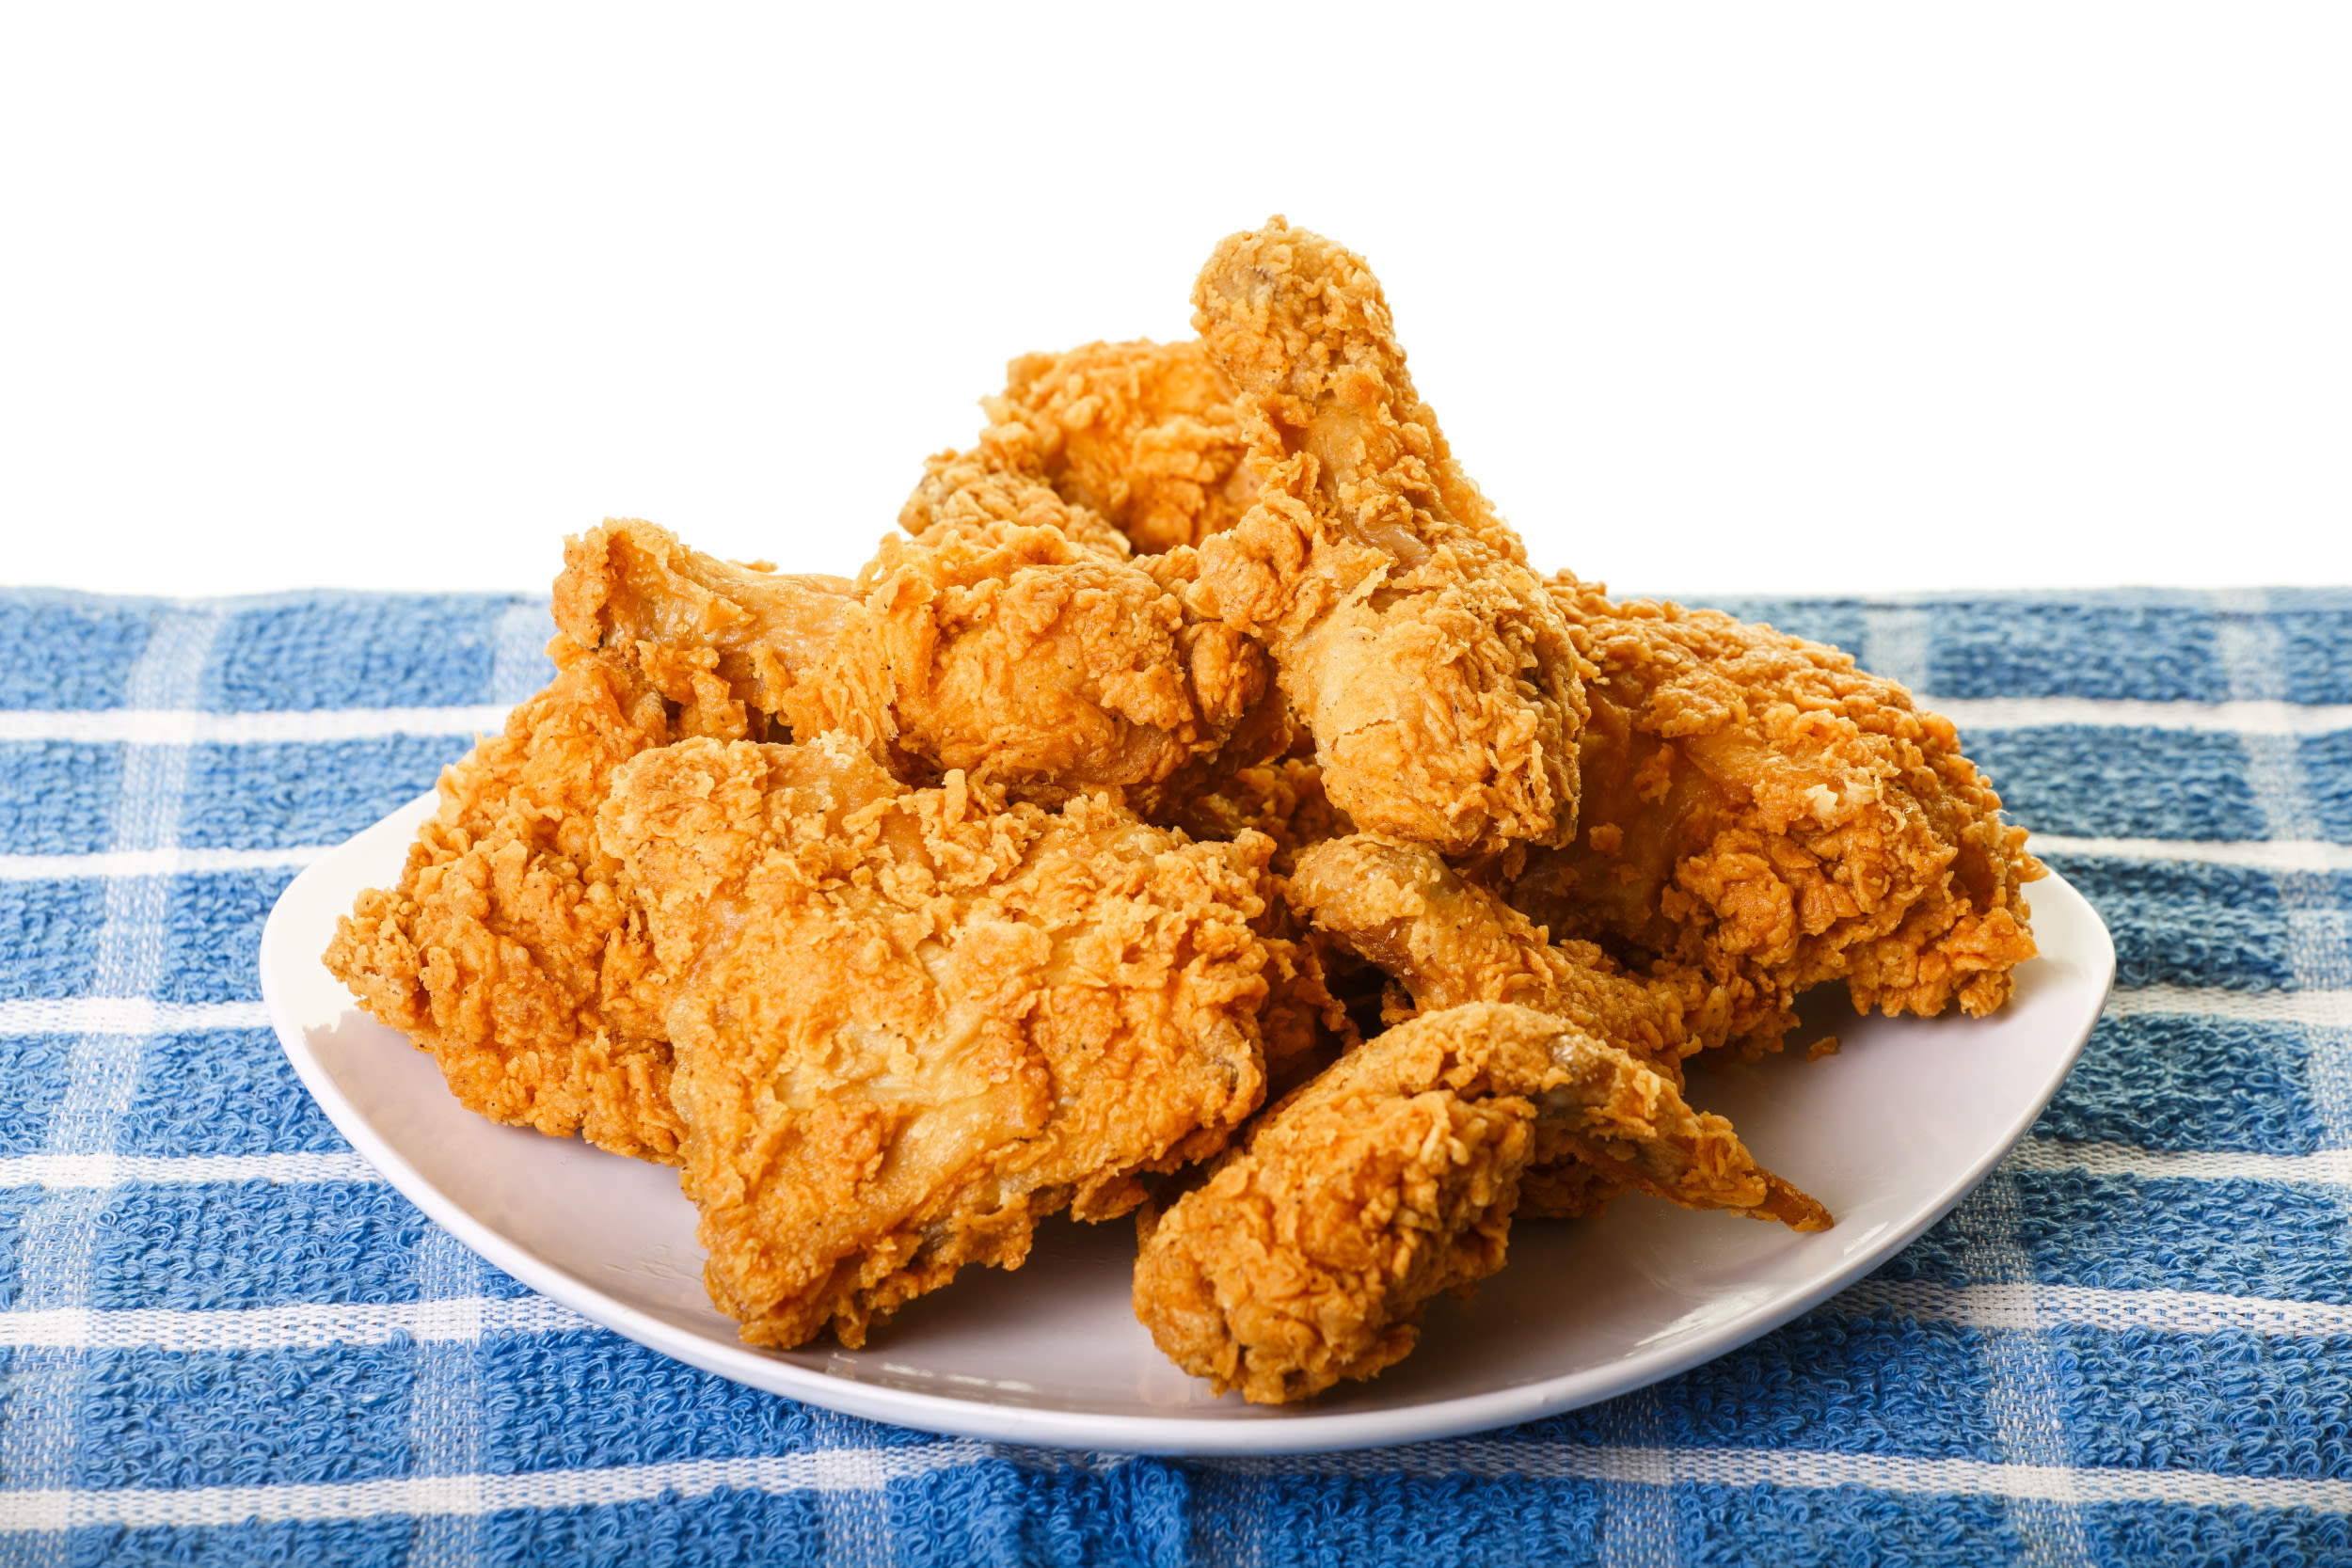 National Fried Chicken Day: How to get free chicken at Burger King, Popeyes